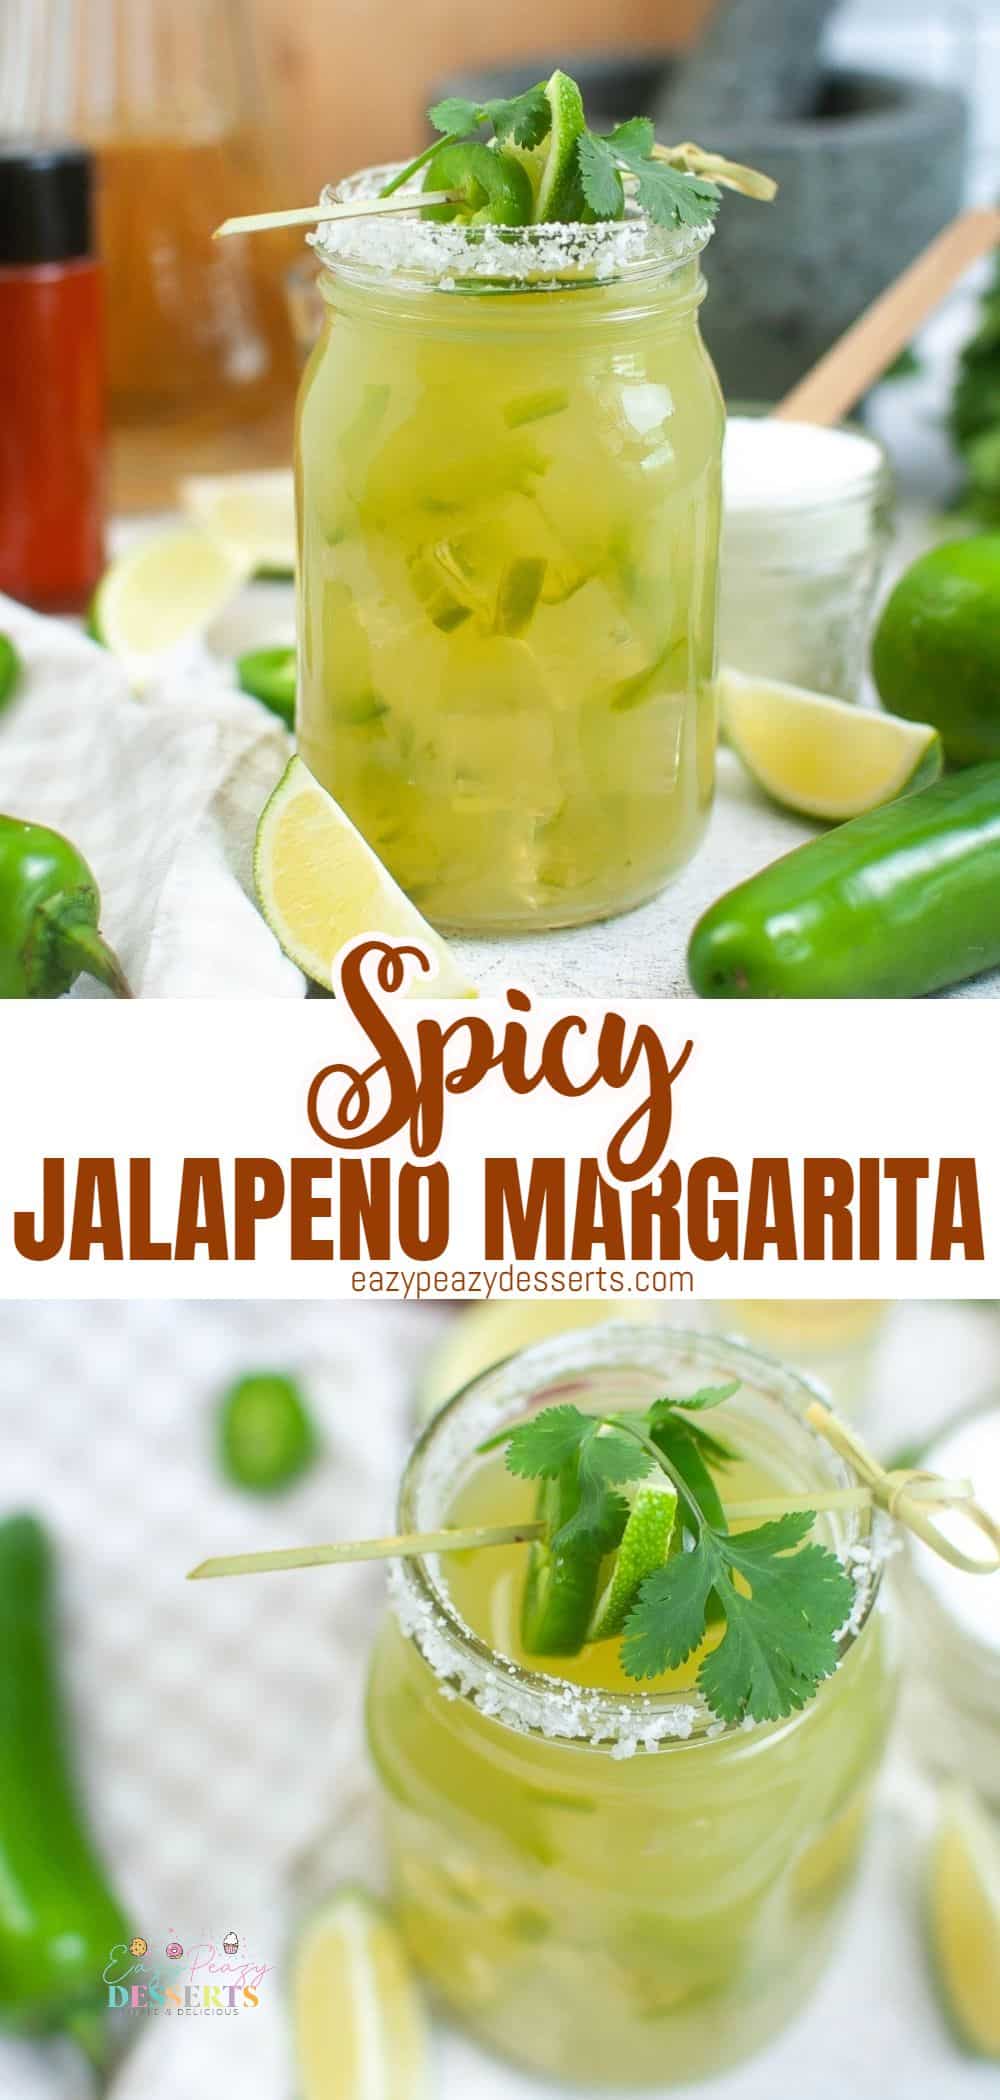 Photo collage of spicy margarita drink